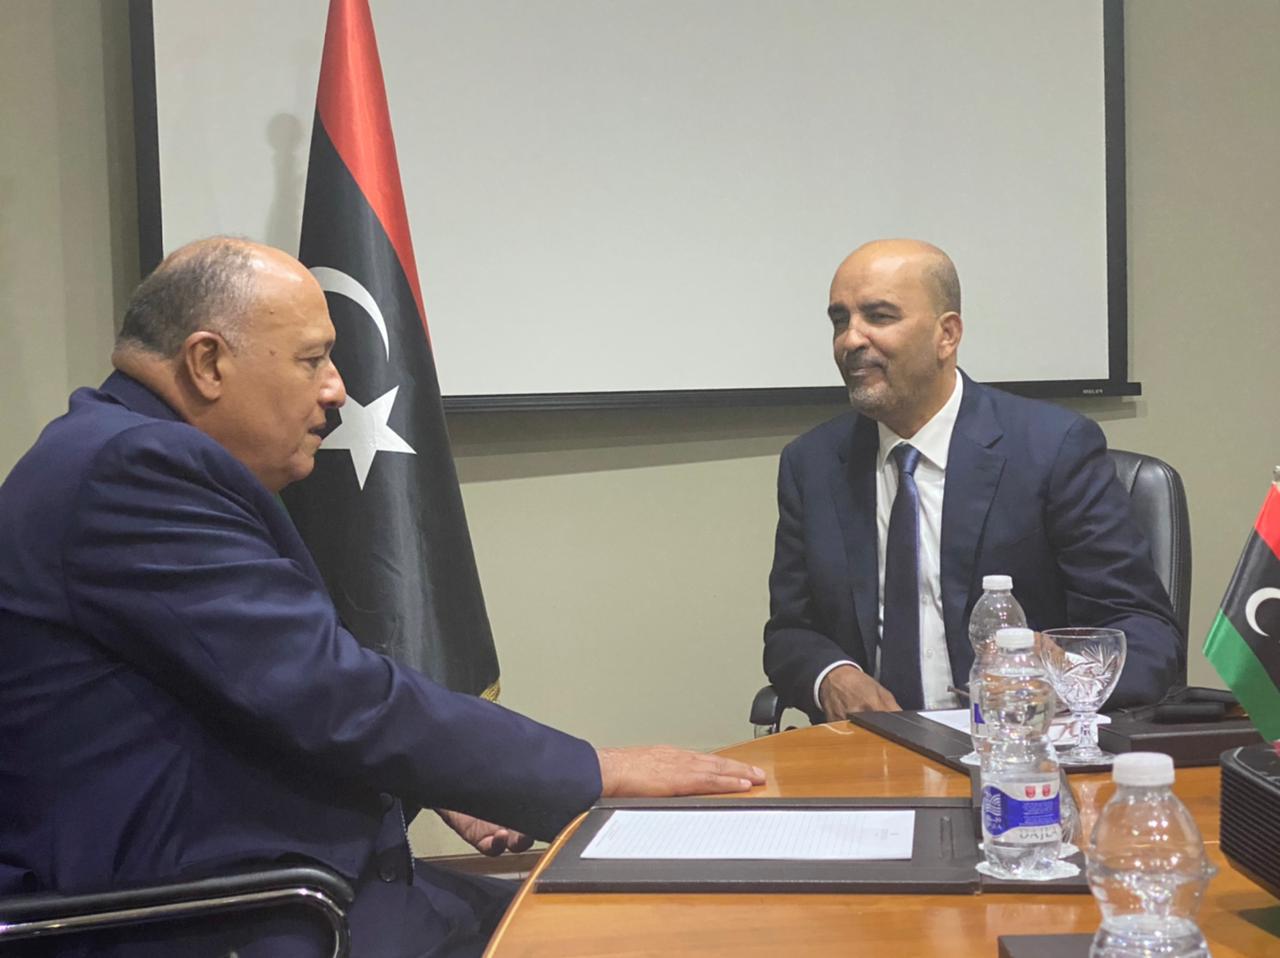 Deputy Head of the Libyan Presidential Council Mousa al-Kawny (r) and Minister of Foreign Affairs Sameh Shokry in Tripoli on October 21, 2021. Press Photo